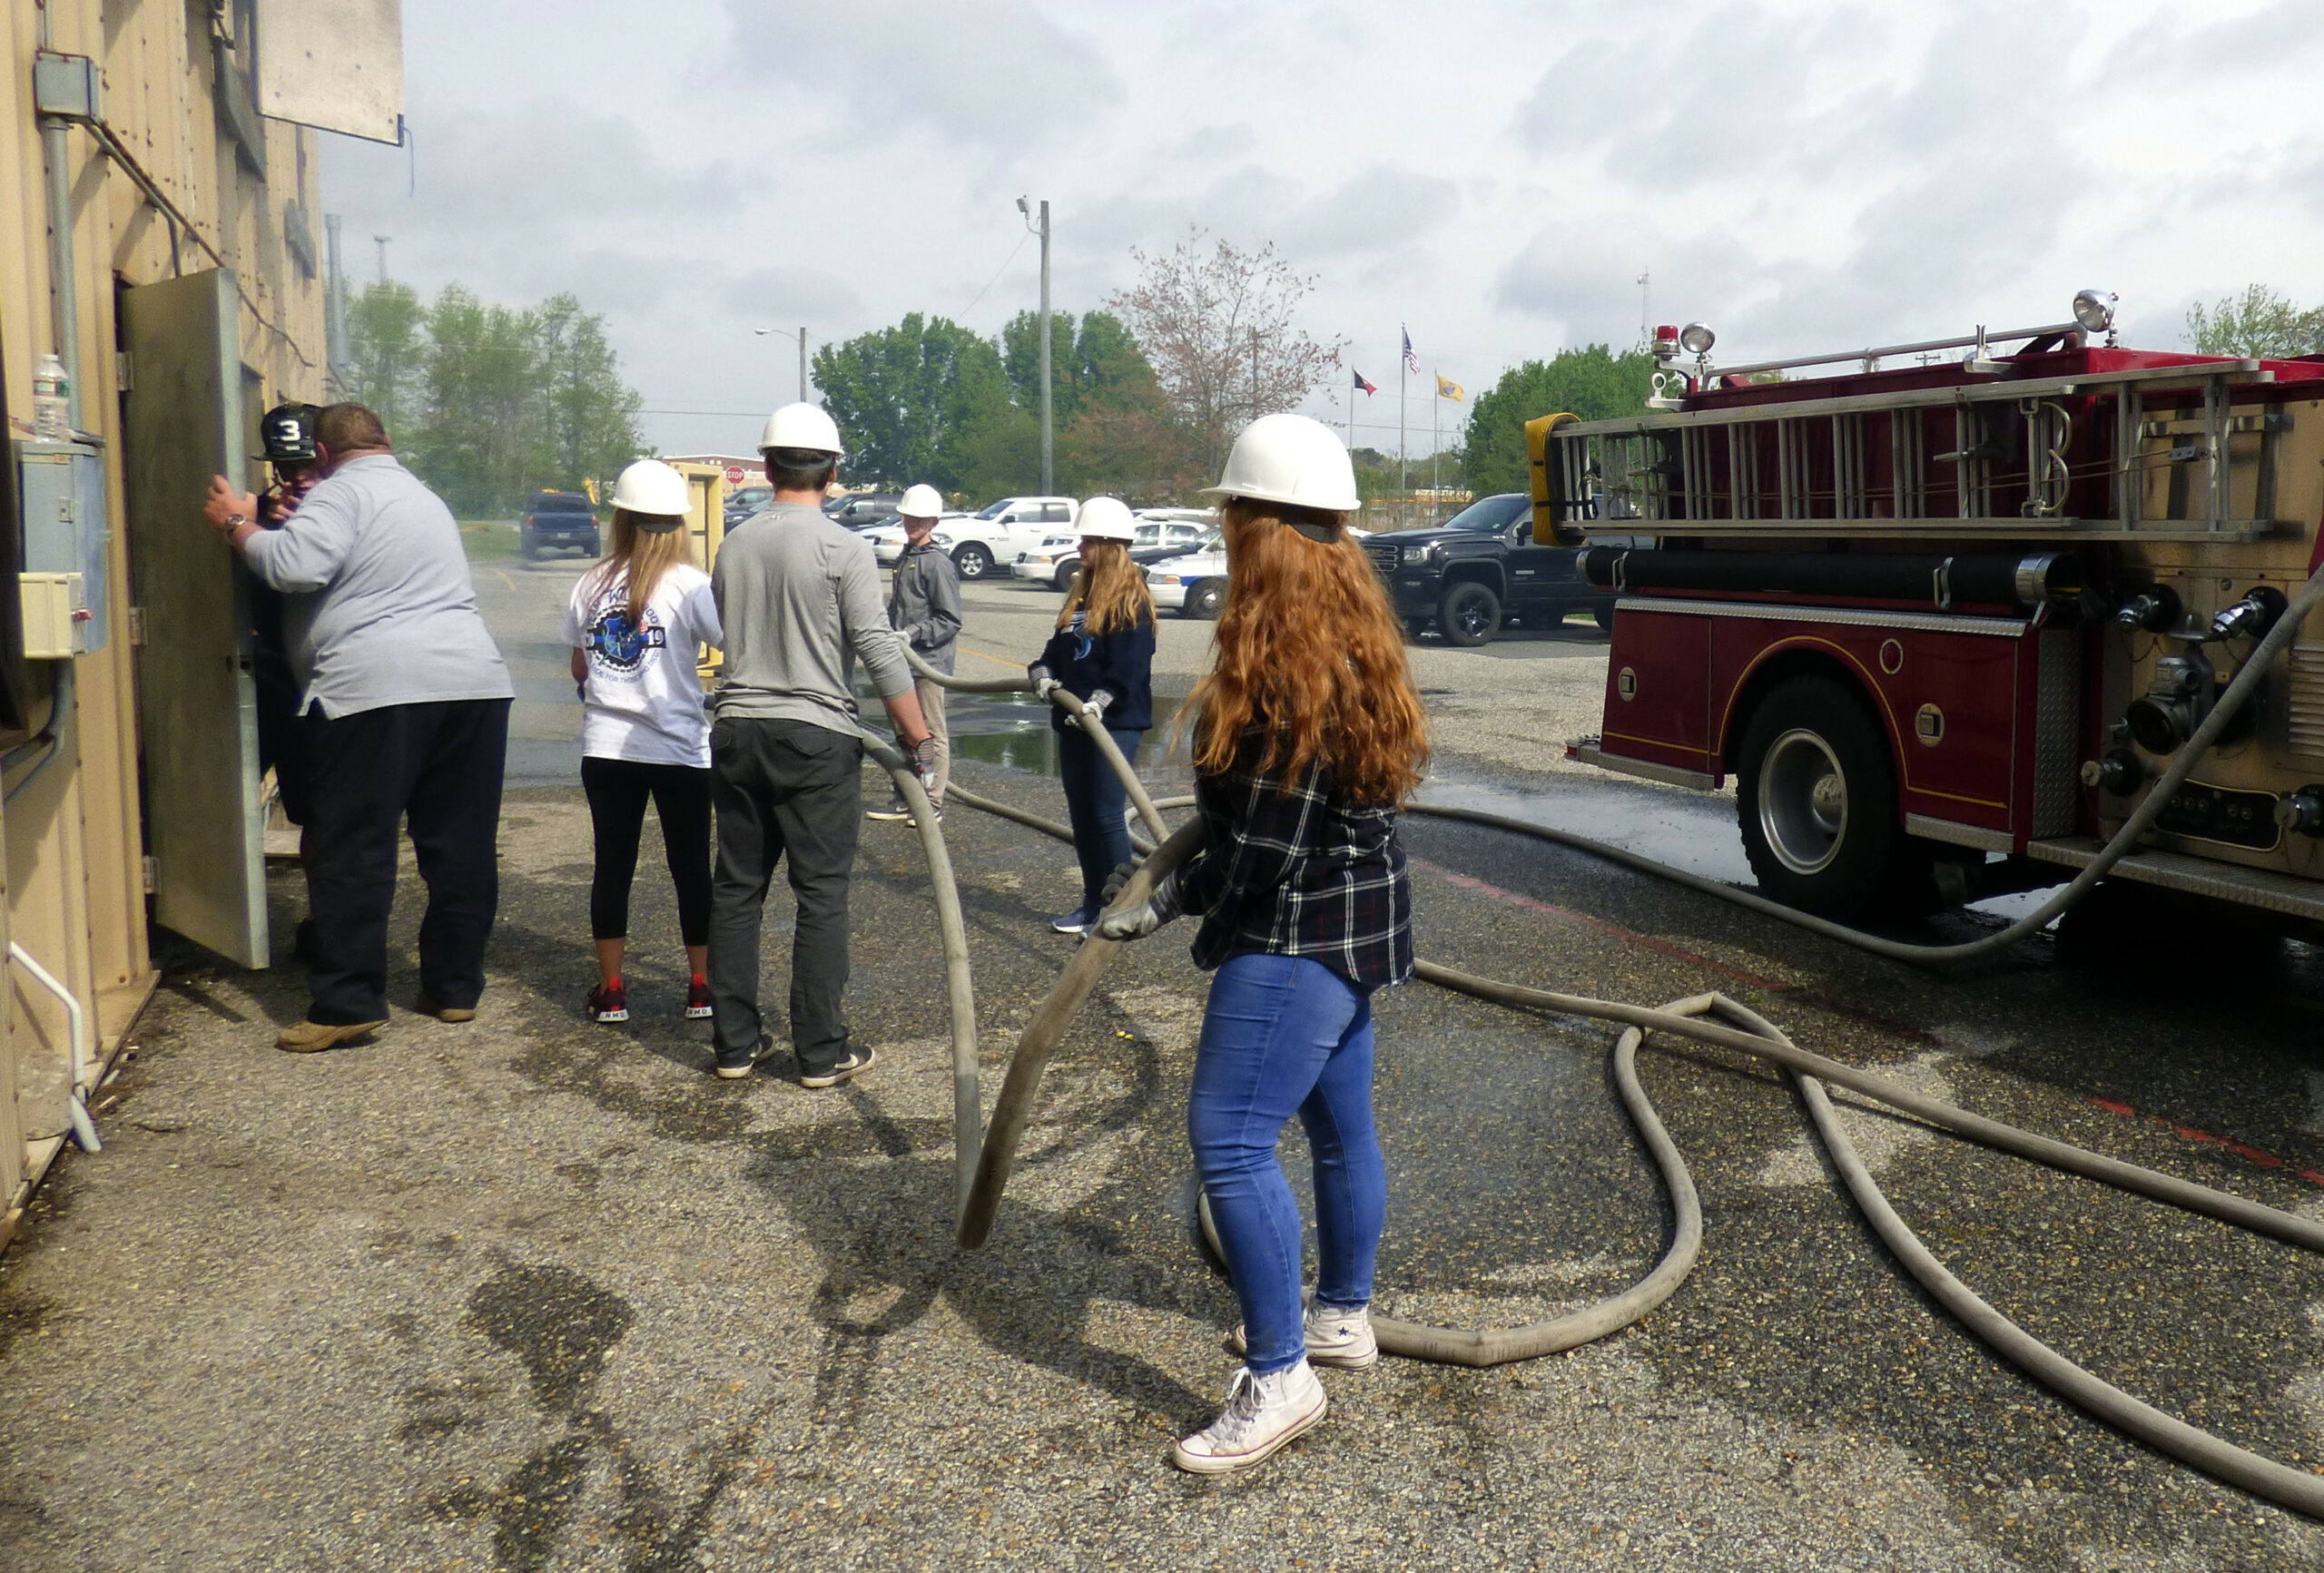 Cape May Tech students at Cape May County Fire Training Academy, which was named a Business Partner of the Year by Cape May County Technical School District.